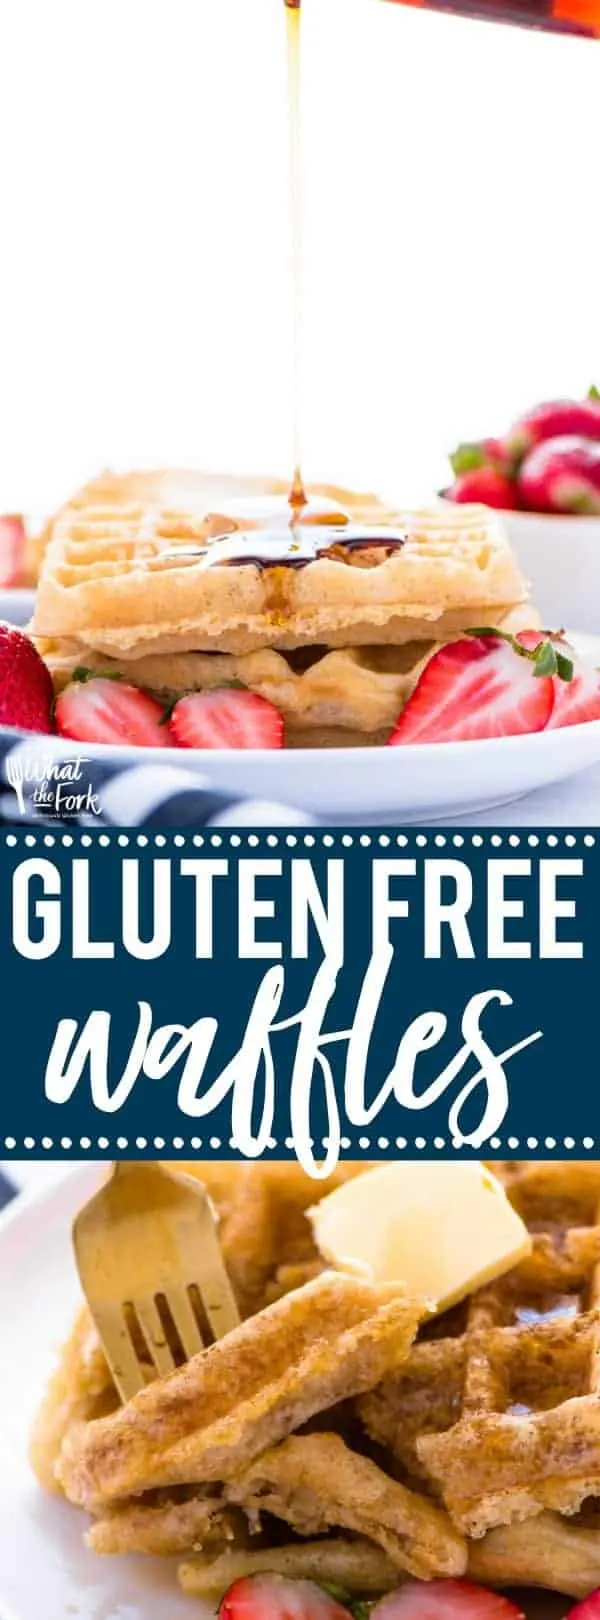 This easy gluten free waffle recipe is a family favorite!